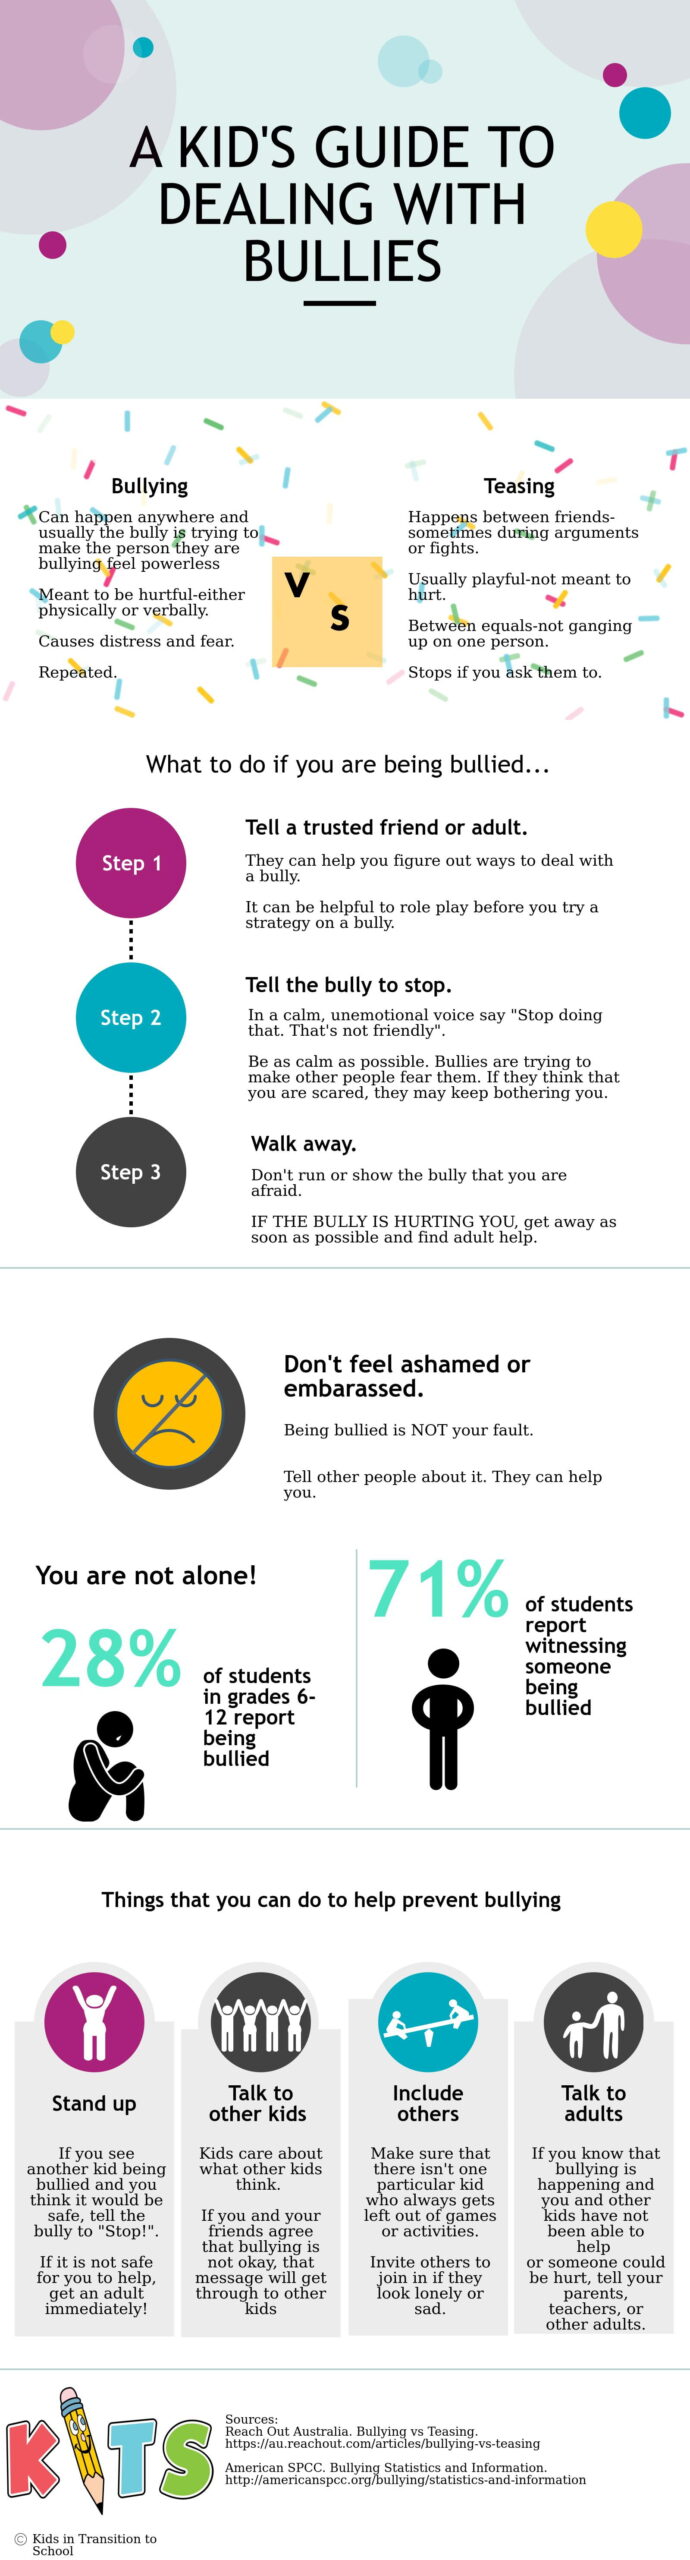 Latest Statistics About Bullying & How You Can Help [Infographic] | Bit Rebels